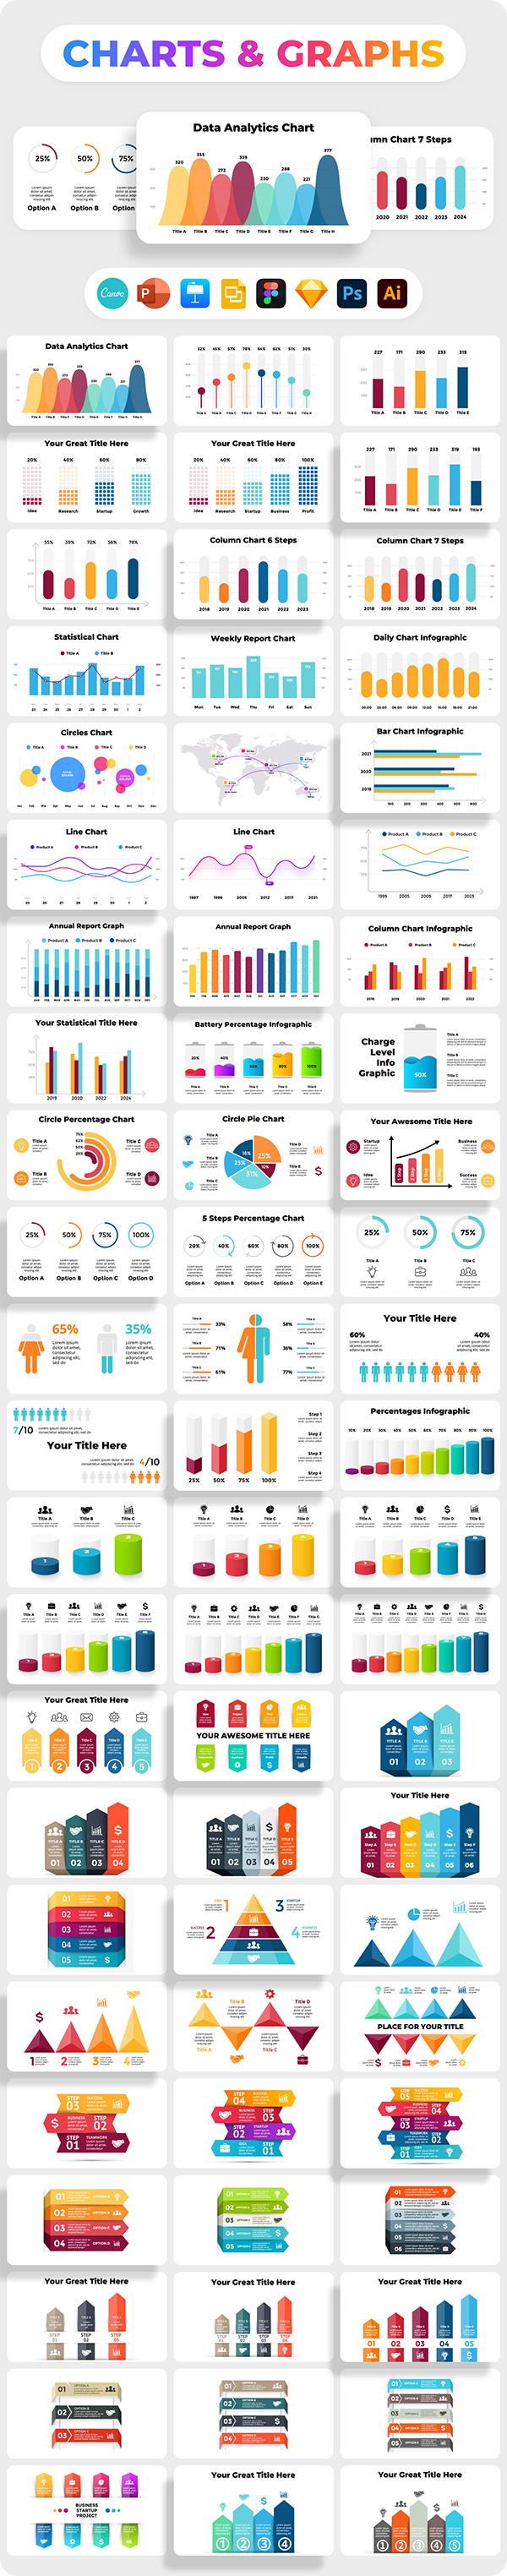 Free Charts, Graphs & Diagrams. Infographic Templates.